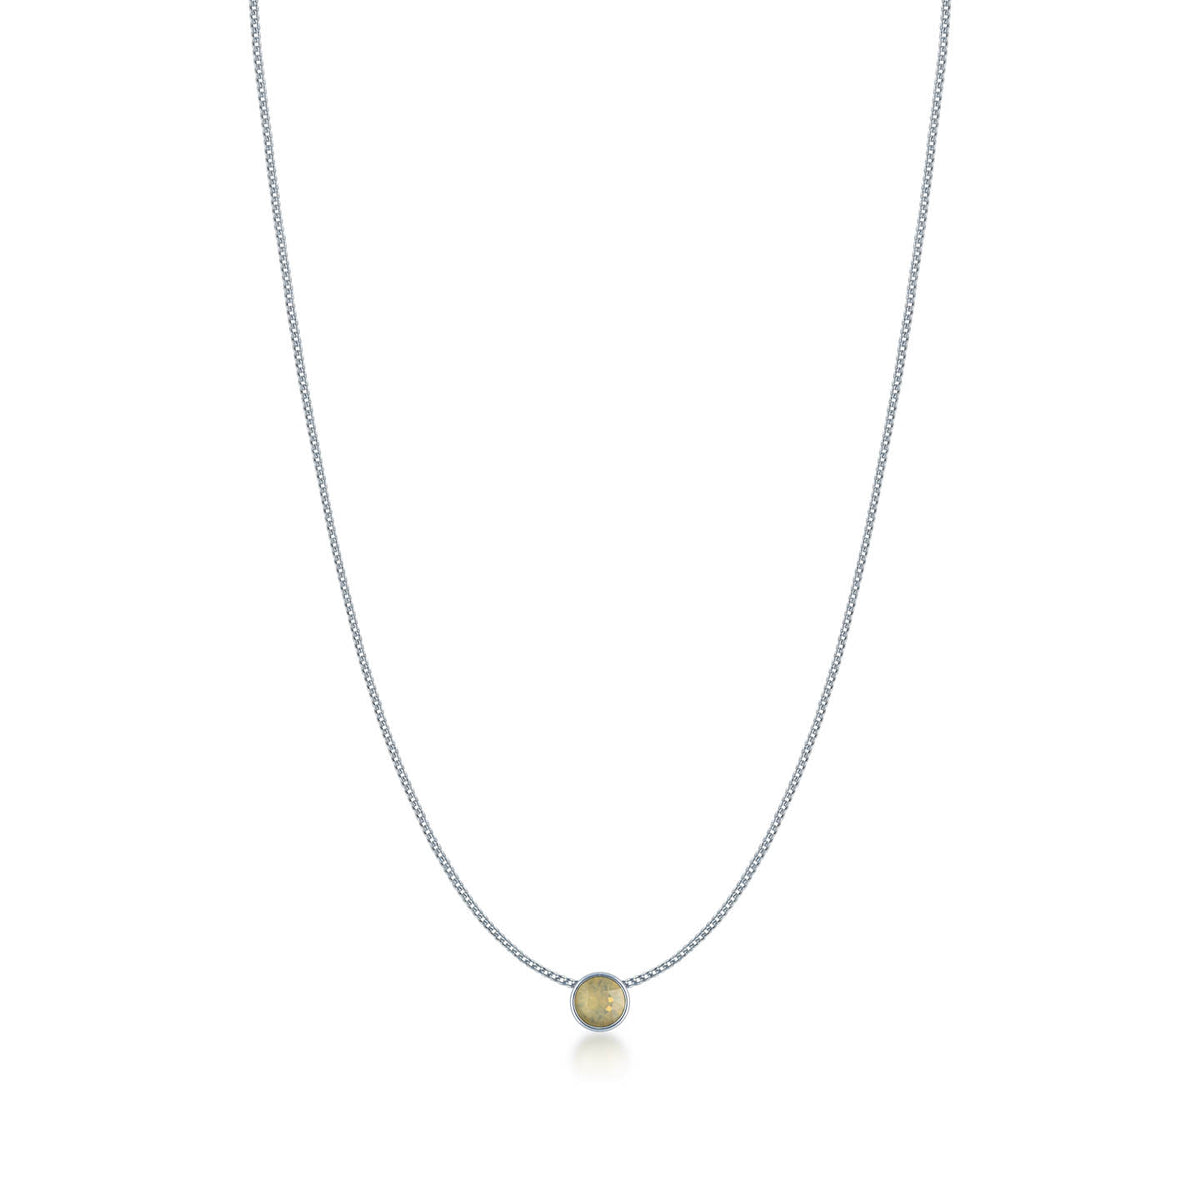 Harley Small Pendant Necklace with Beige Sand Round Opals from Swarovski Silver Toned Rhodium Plated - Ed Heart